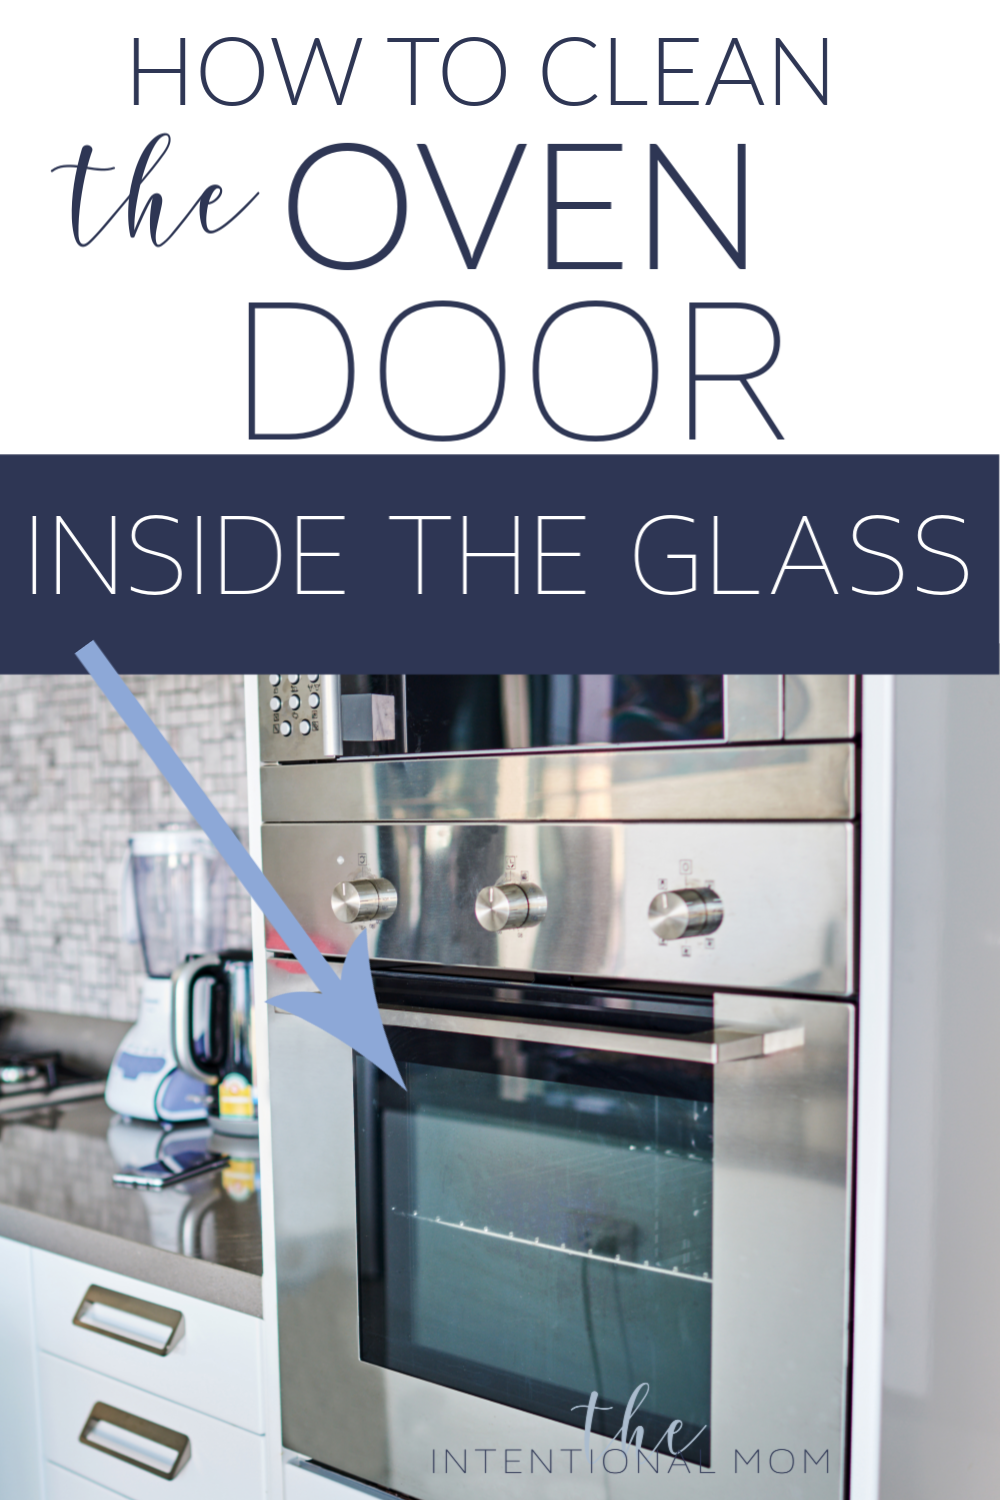 How to Clean The Glass Oven Door - Inside the Glass!